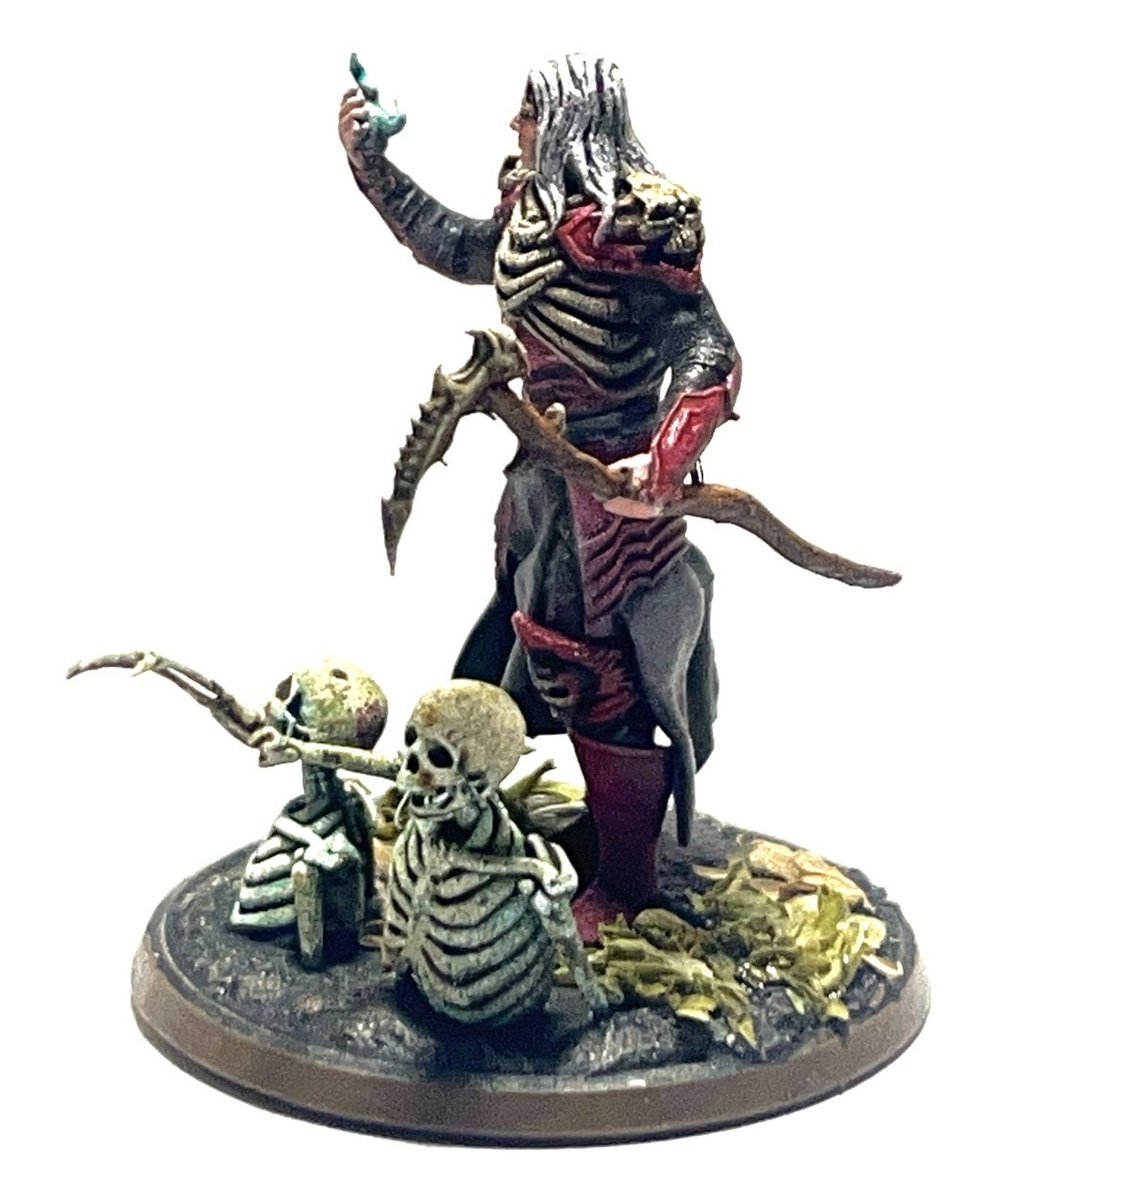 A really nice painting from on of our tribers . 
Xal the necromancer 

#dragon #tabletop #jeuxderole #game #dnd #printed #printedminis  #dungeonsanddragons  #wargaming #3dprinting  #3dprinted  #collectibles  #collection #miniature #miniaturepainting